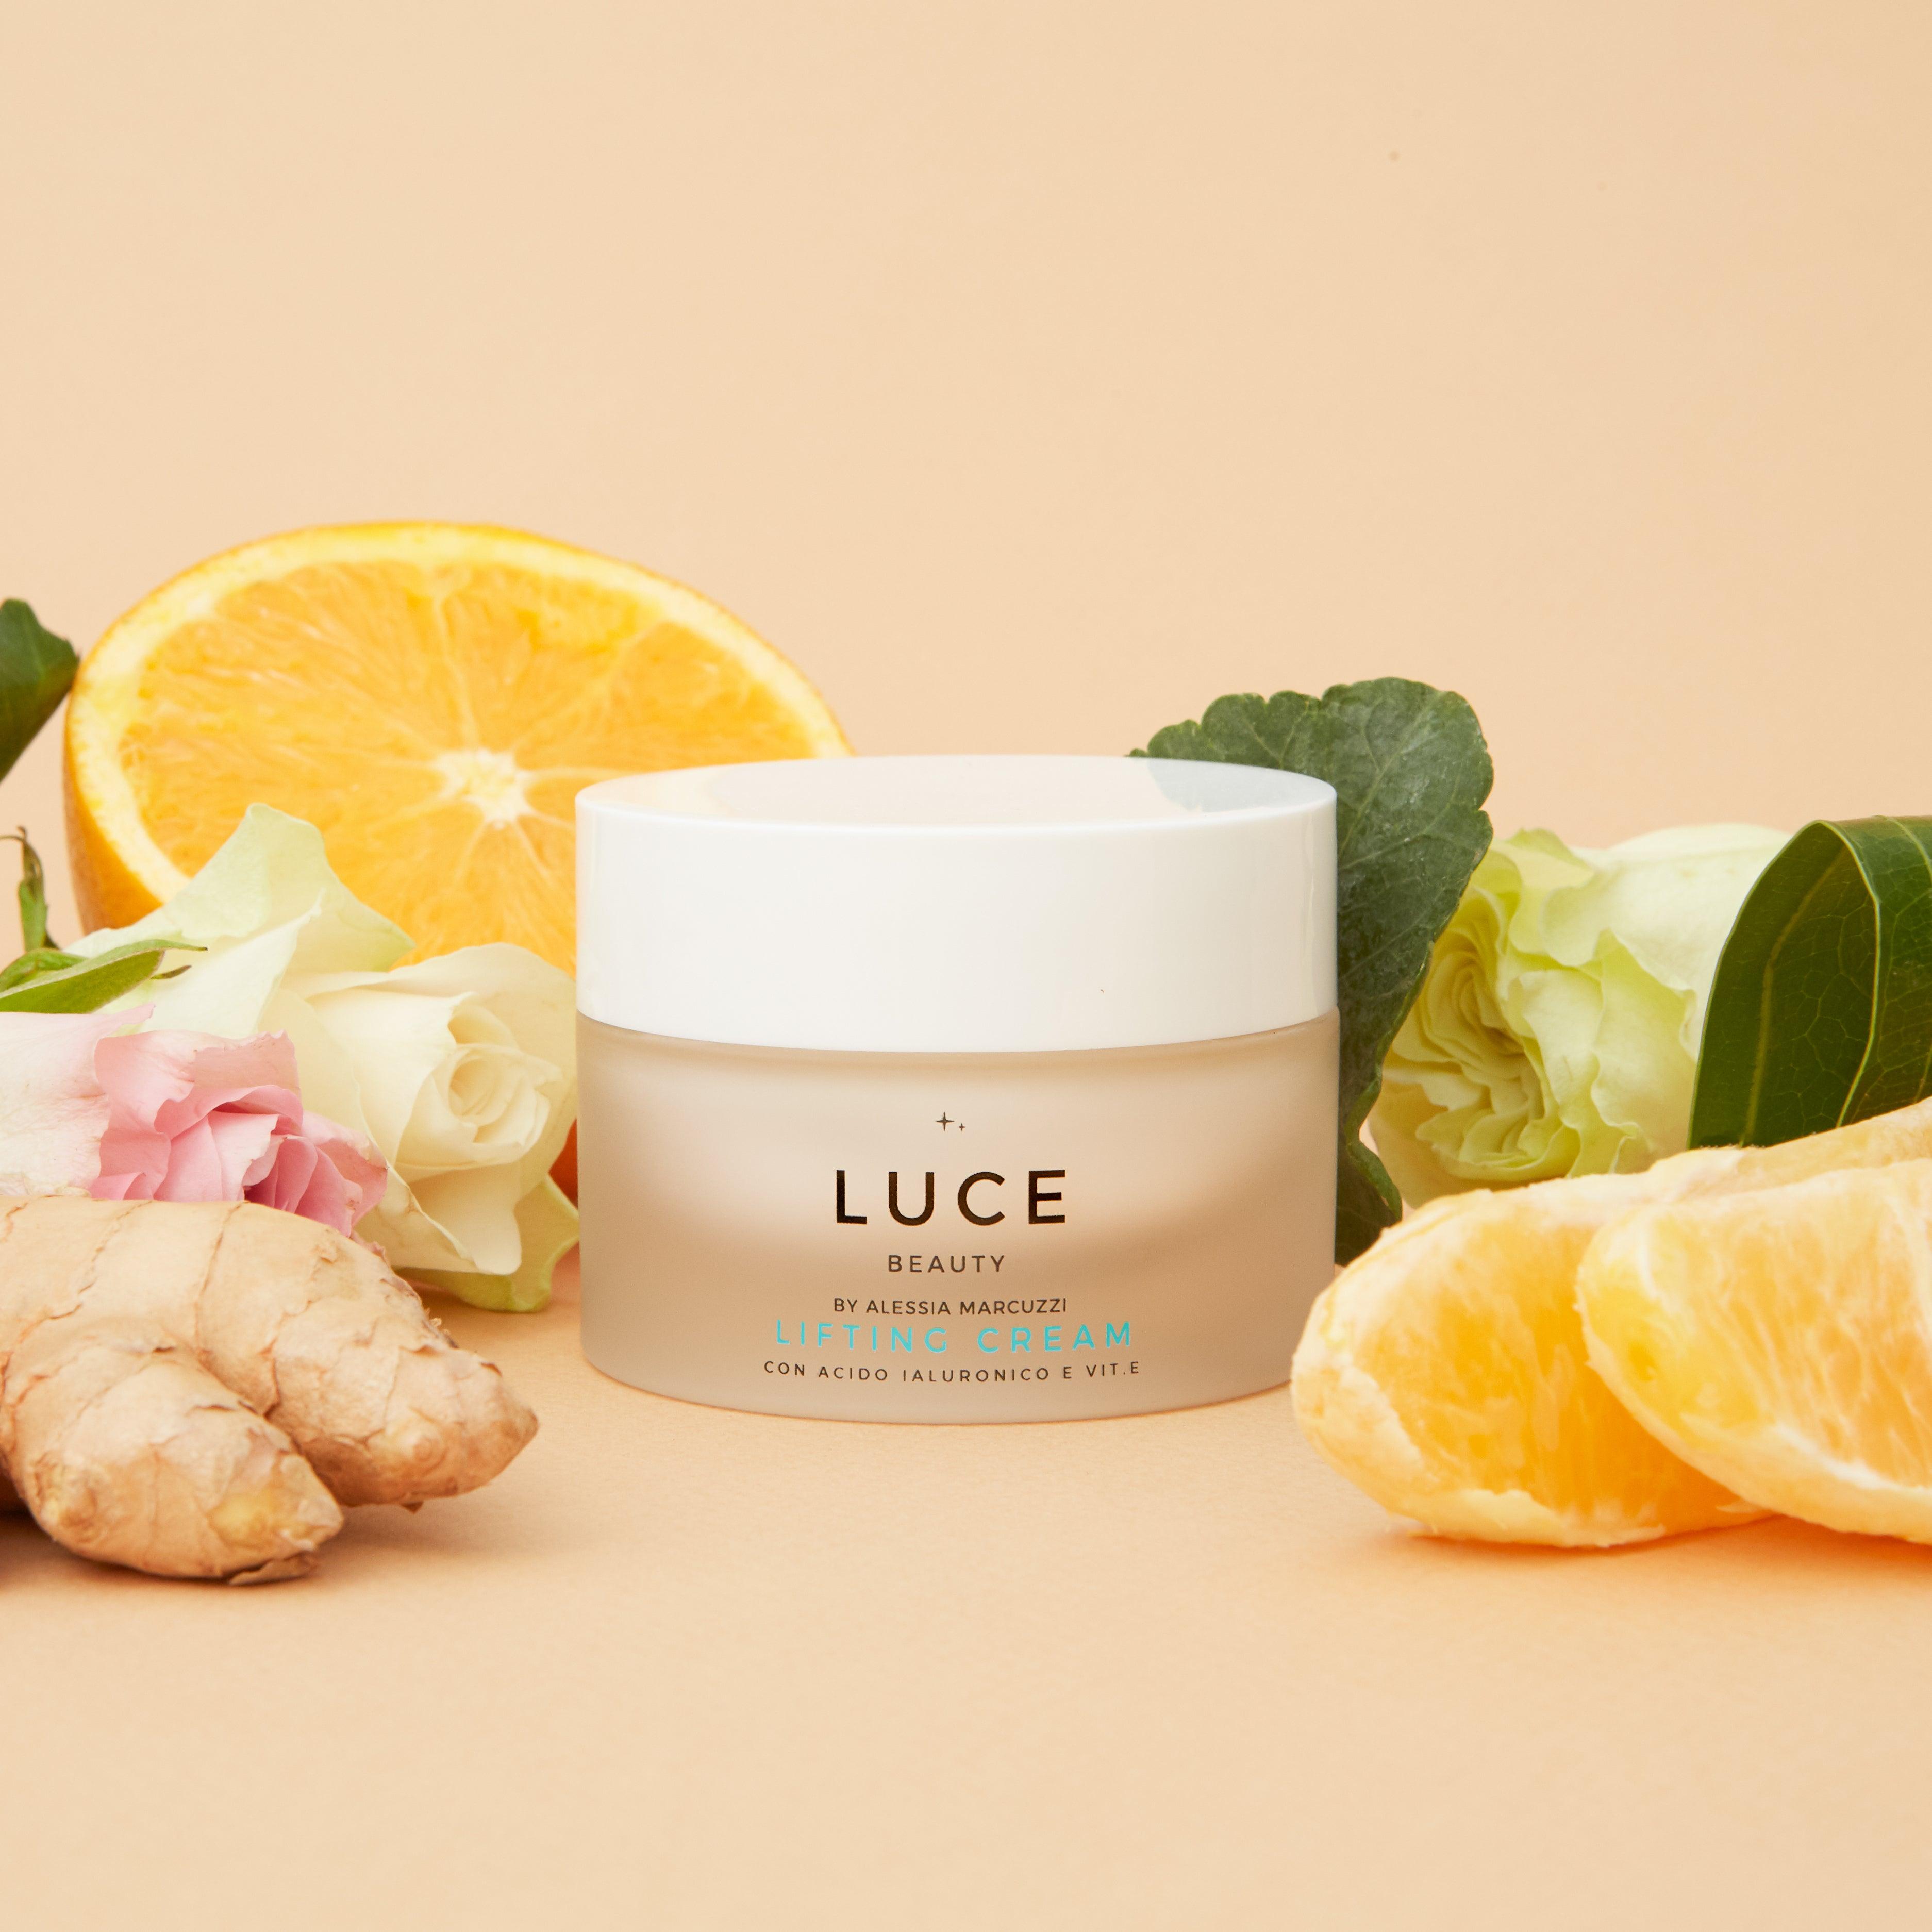 Lifting Cream - Ingredienti - Luce Beauty by Alessia Marcuzzi